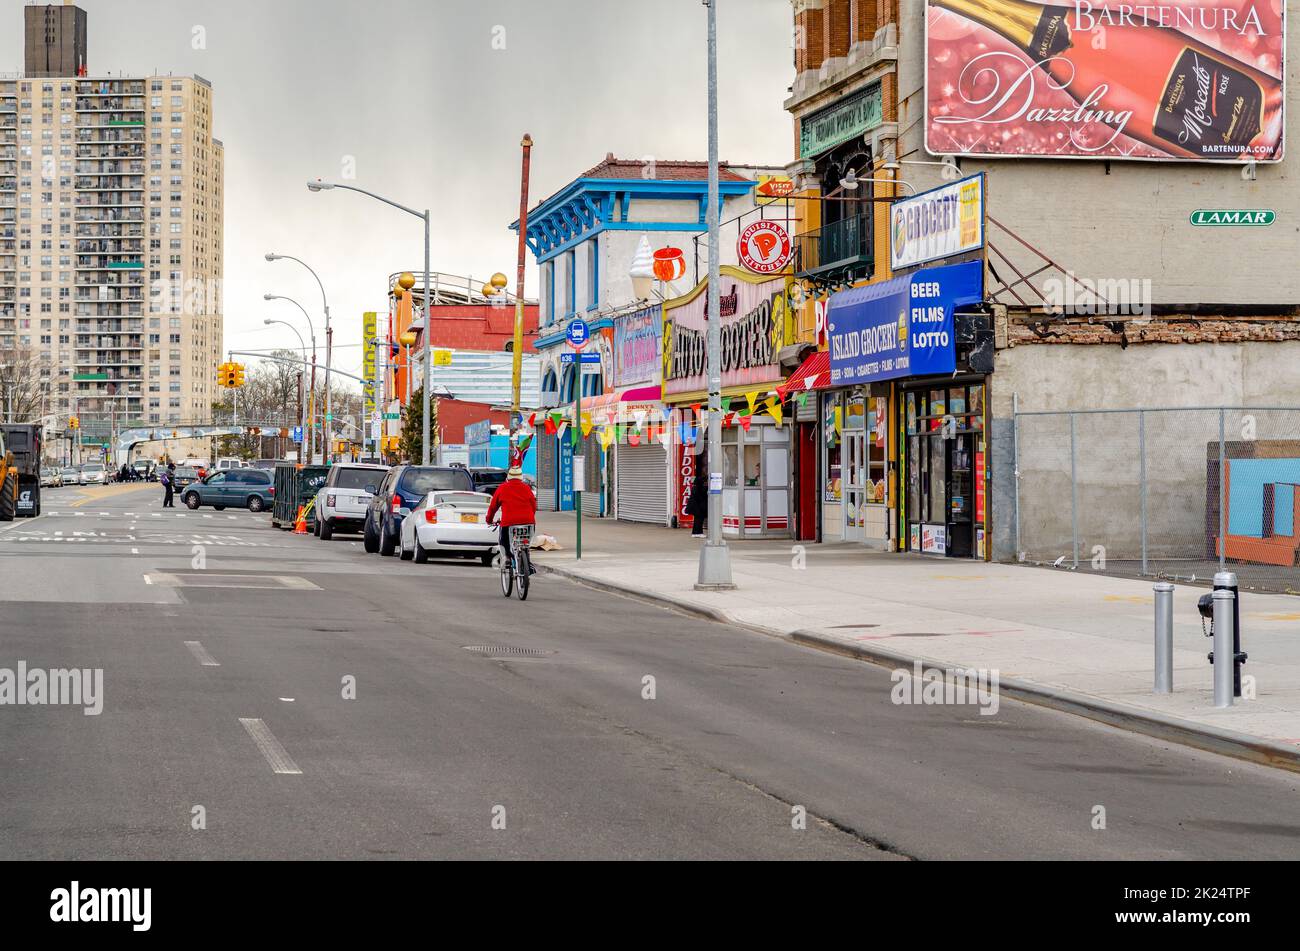 Stores and Restaurants at City Street in Coney island, Brooklyn, New York City during winter day with cloudy sky, Cars parked next to the street in fr Stock Photo